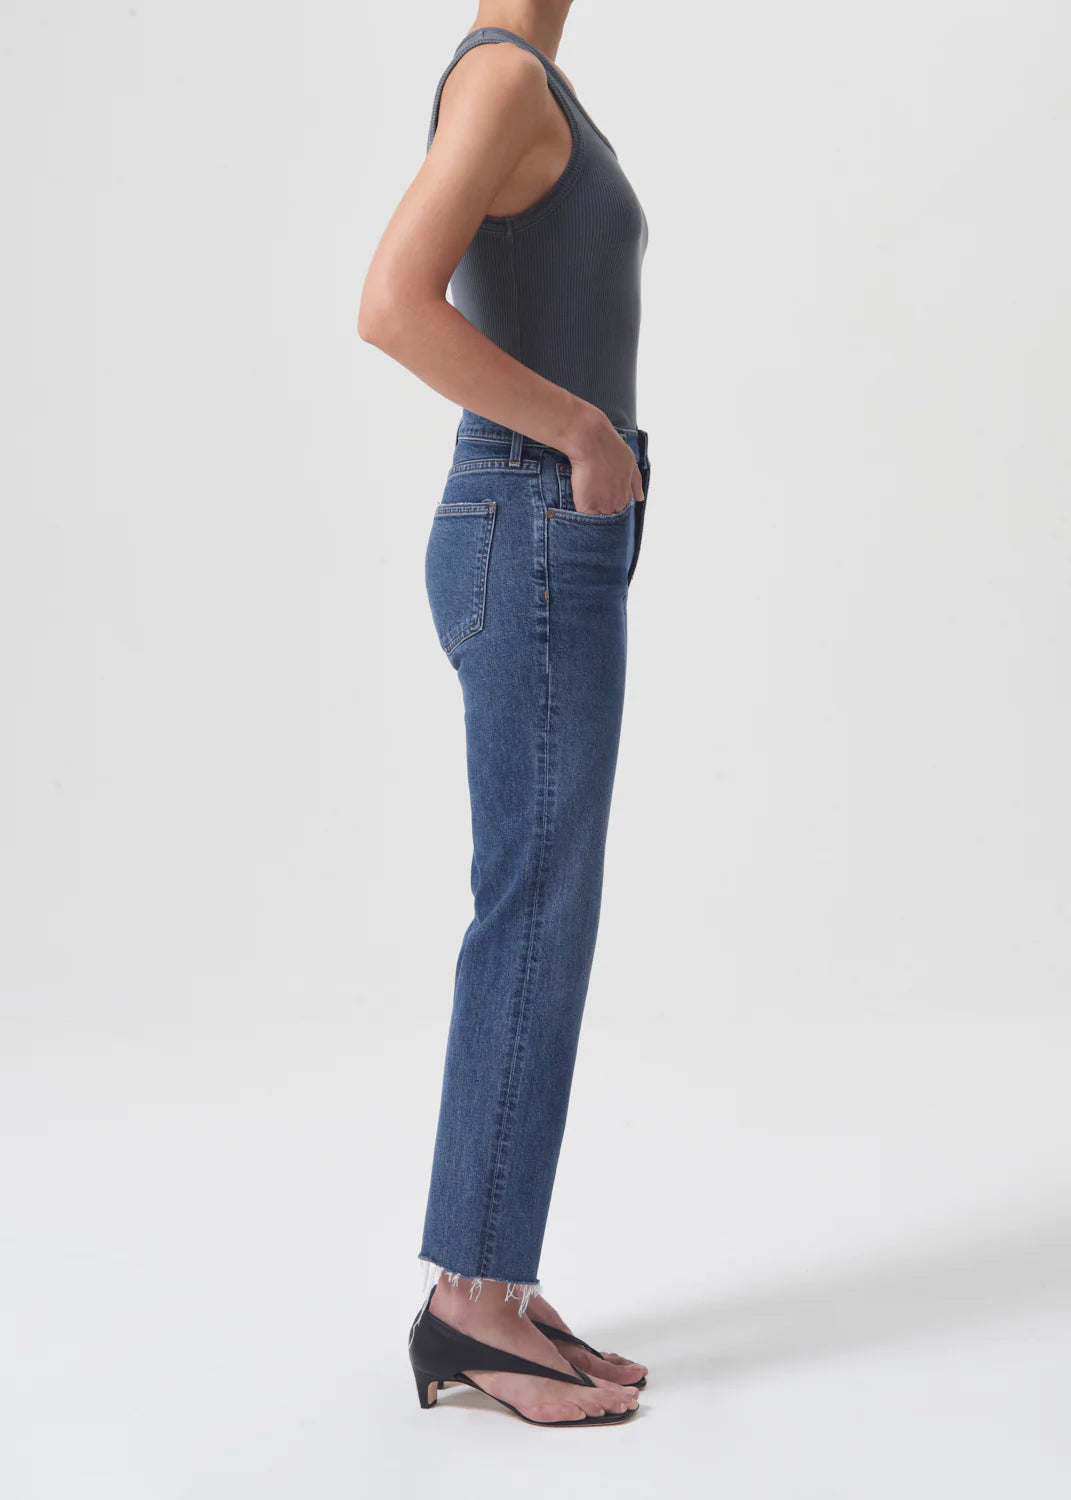 Kye Mid Rise Straight Crop (Stretch) in Mirage